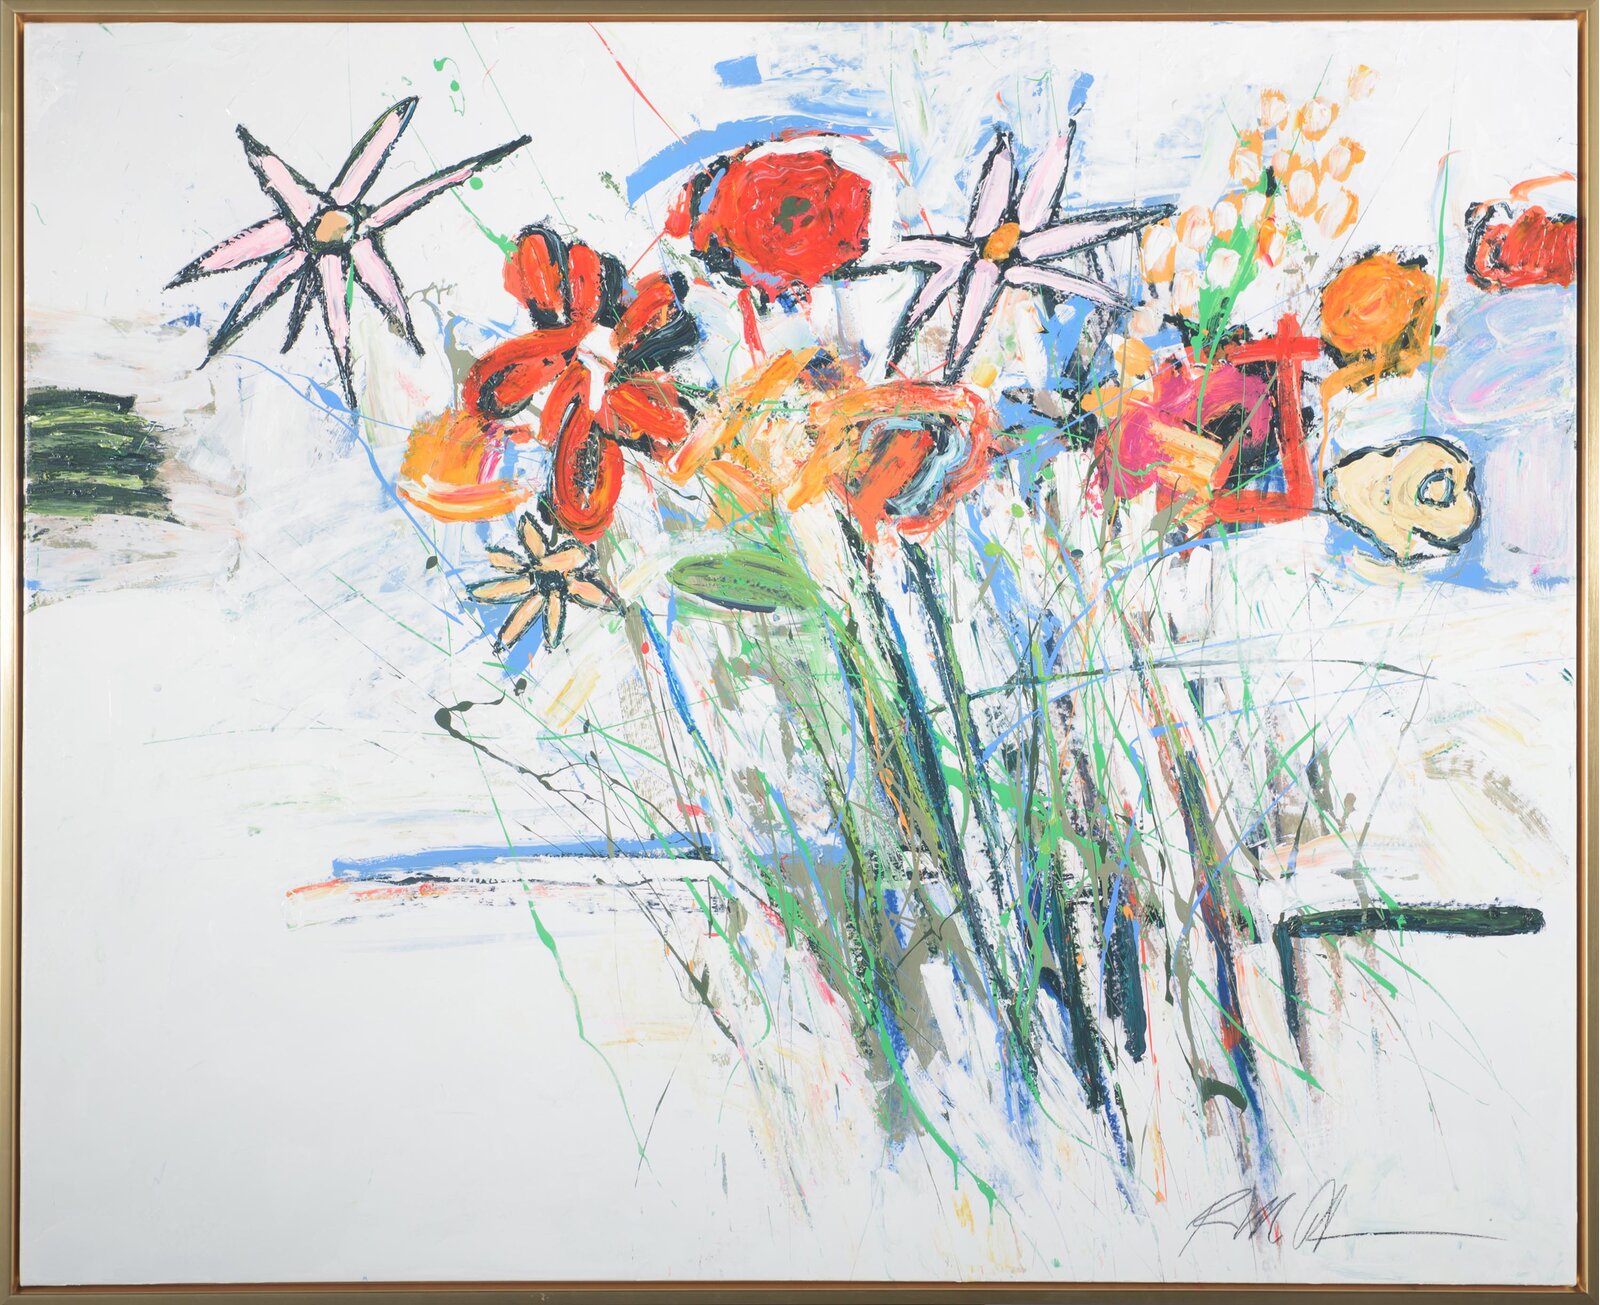 'Wildflowers' by Robert Robinson - Picture Frame Painting Print on Canvas